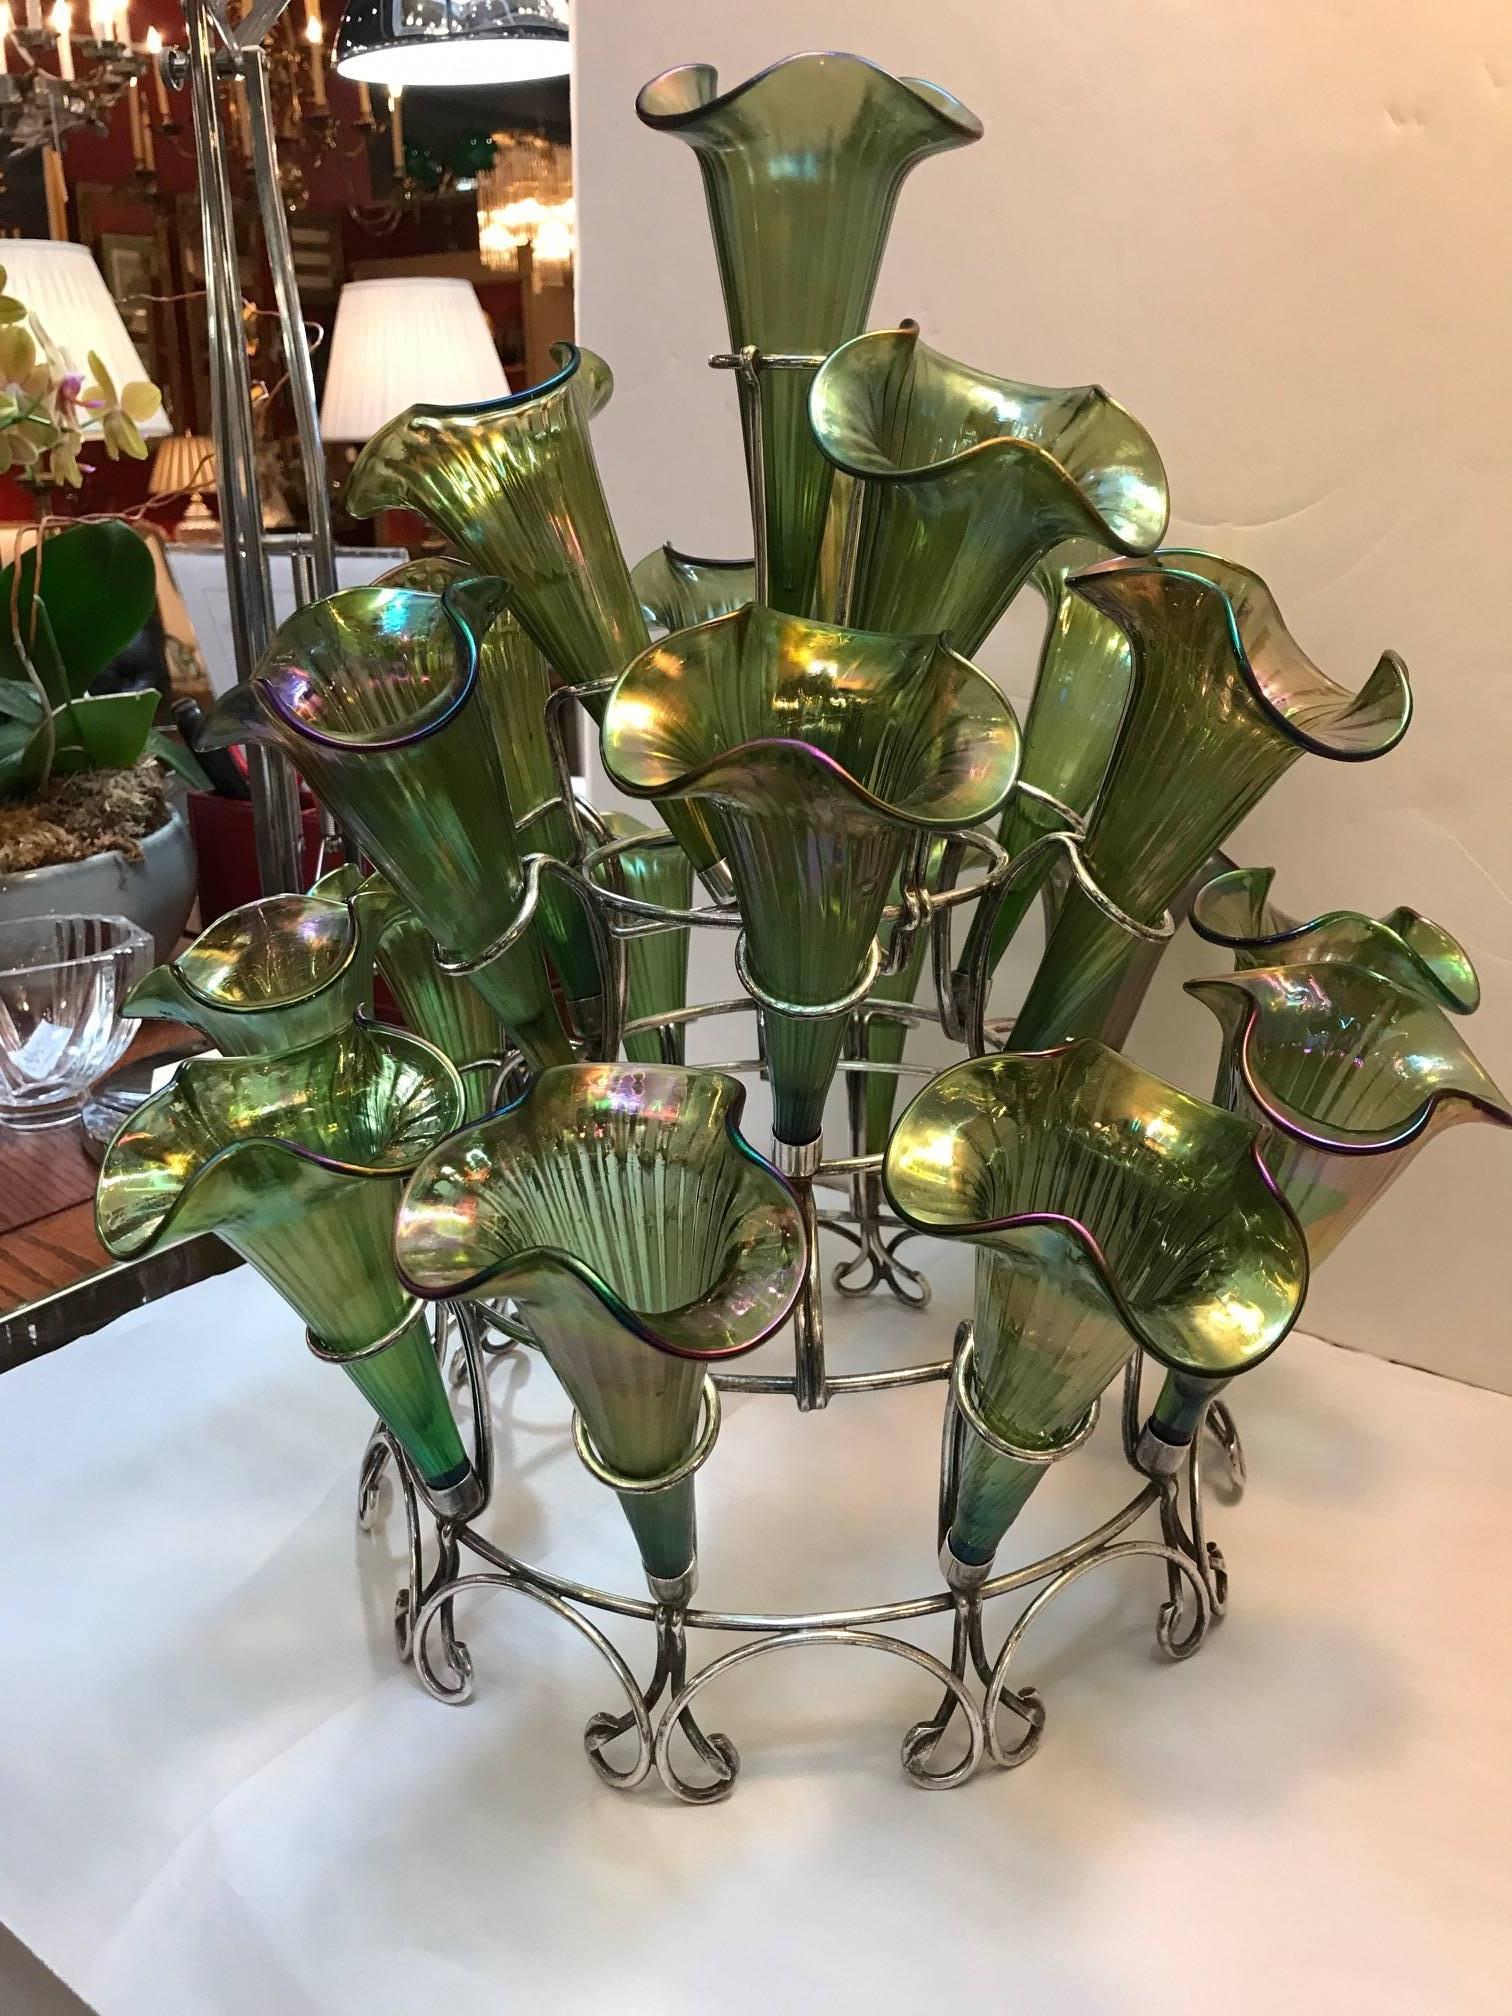 Impressive Epergne with 20 Loets glass flutes. An iridescent finish on each floral trumpet shaped insert.